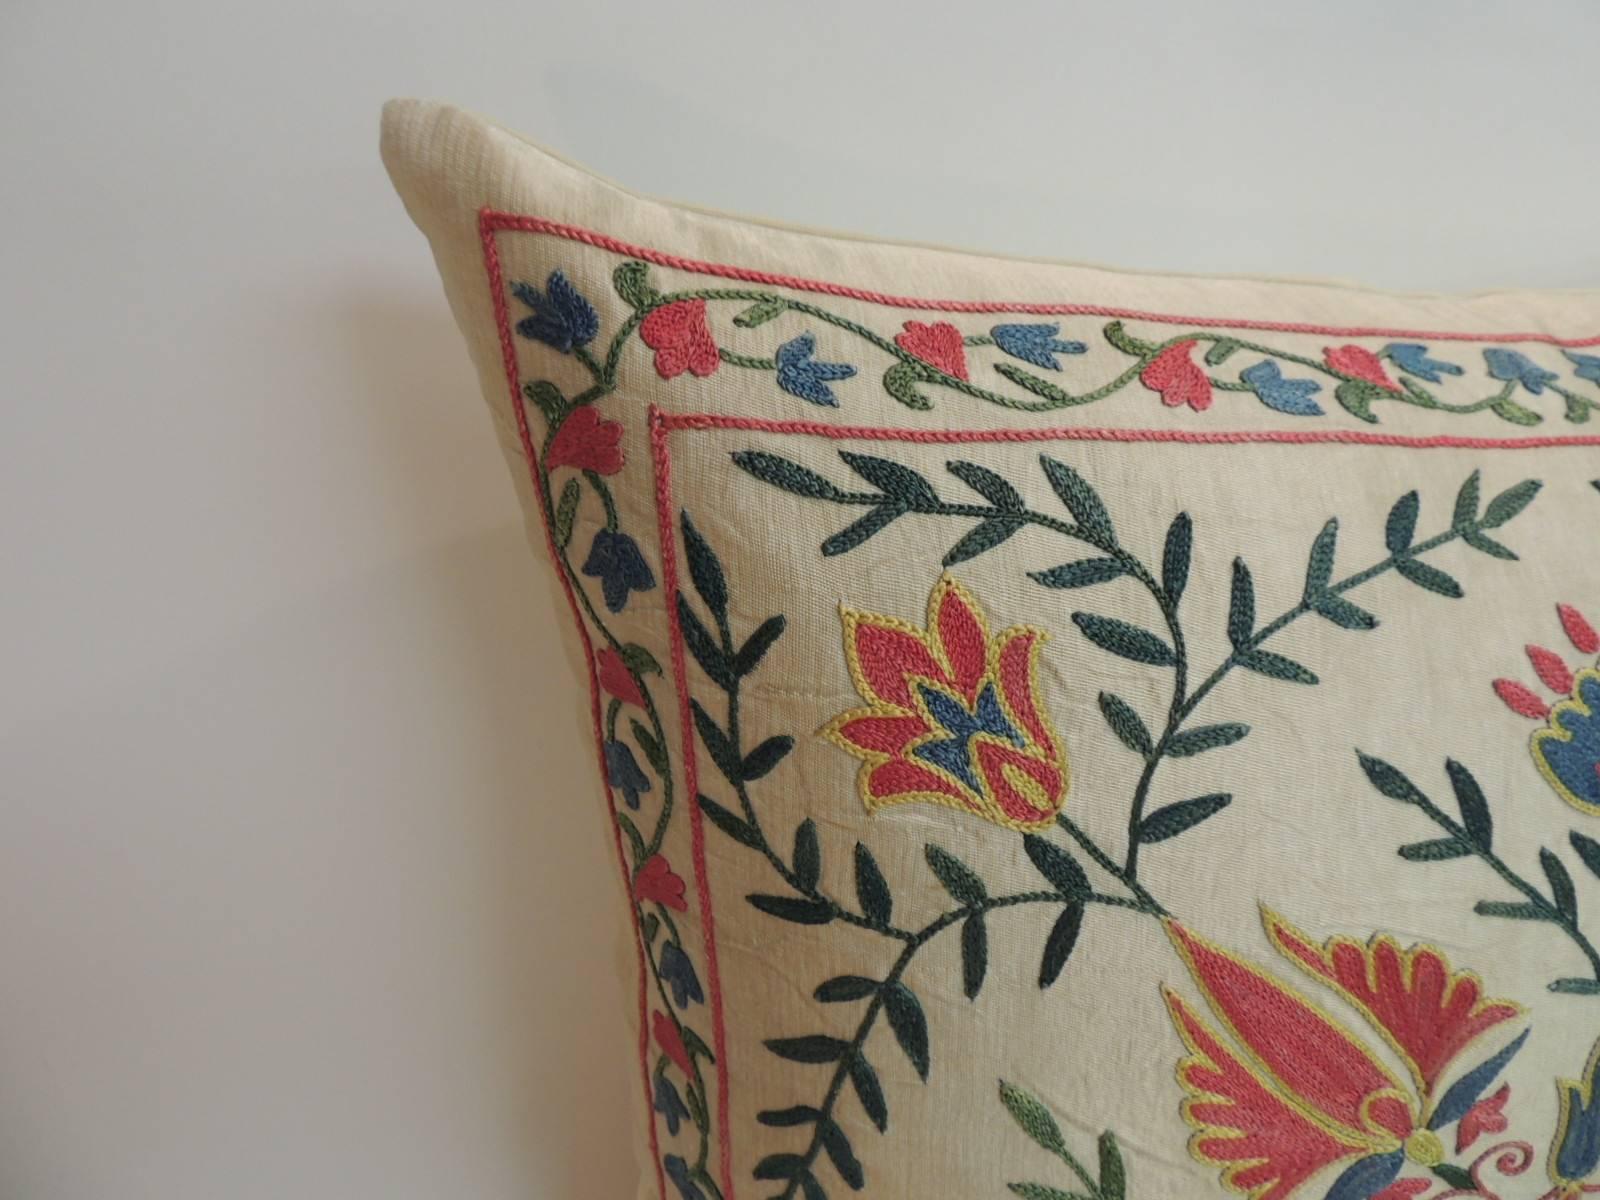 Antique Textiles Galleries:
Vintage floral motif Suzani silk on silk embroidered decorative square pillow. Throw pillow finished with a soft yellow linen backing. Accent Suzani vintage pillow textile in shades of yellow, sky blue, orange, red.